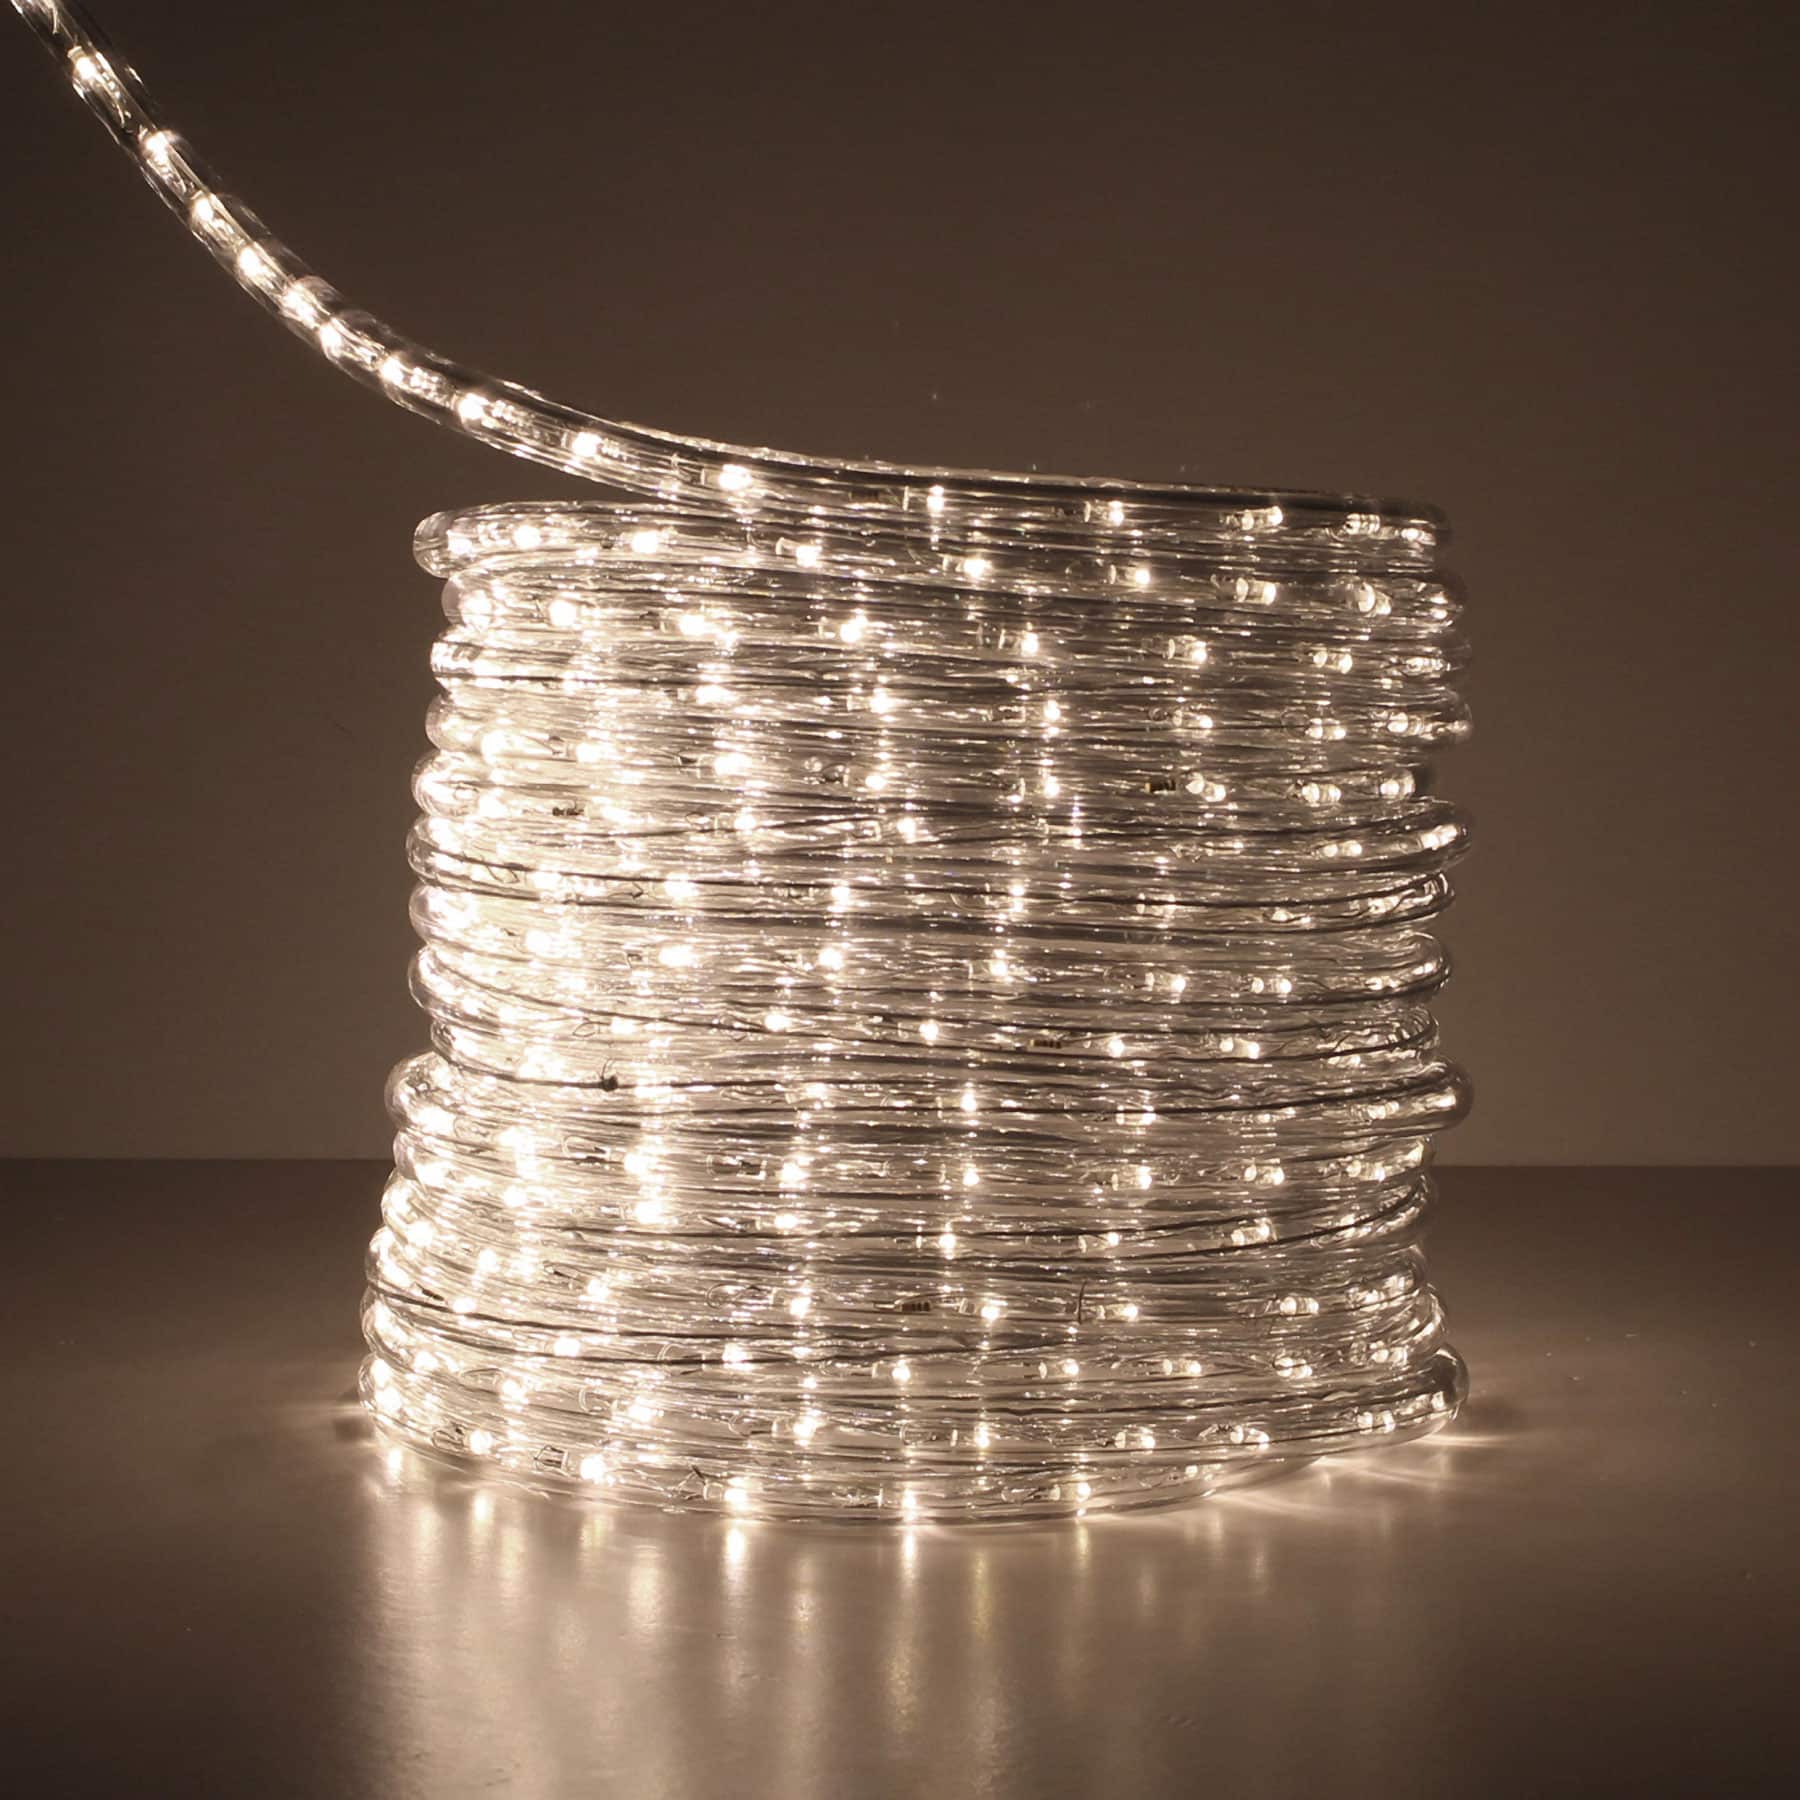 10 Meter Cool White Led Rope Light, Low Voltage Led Rope Lights Outdoor Uk